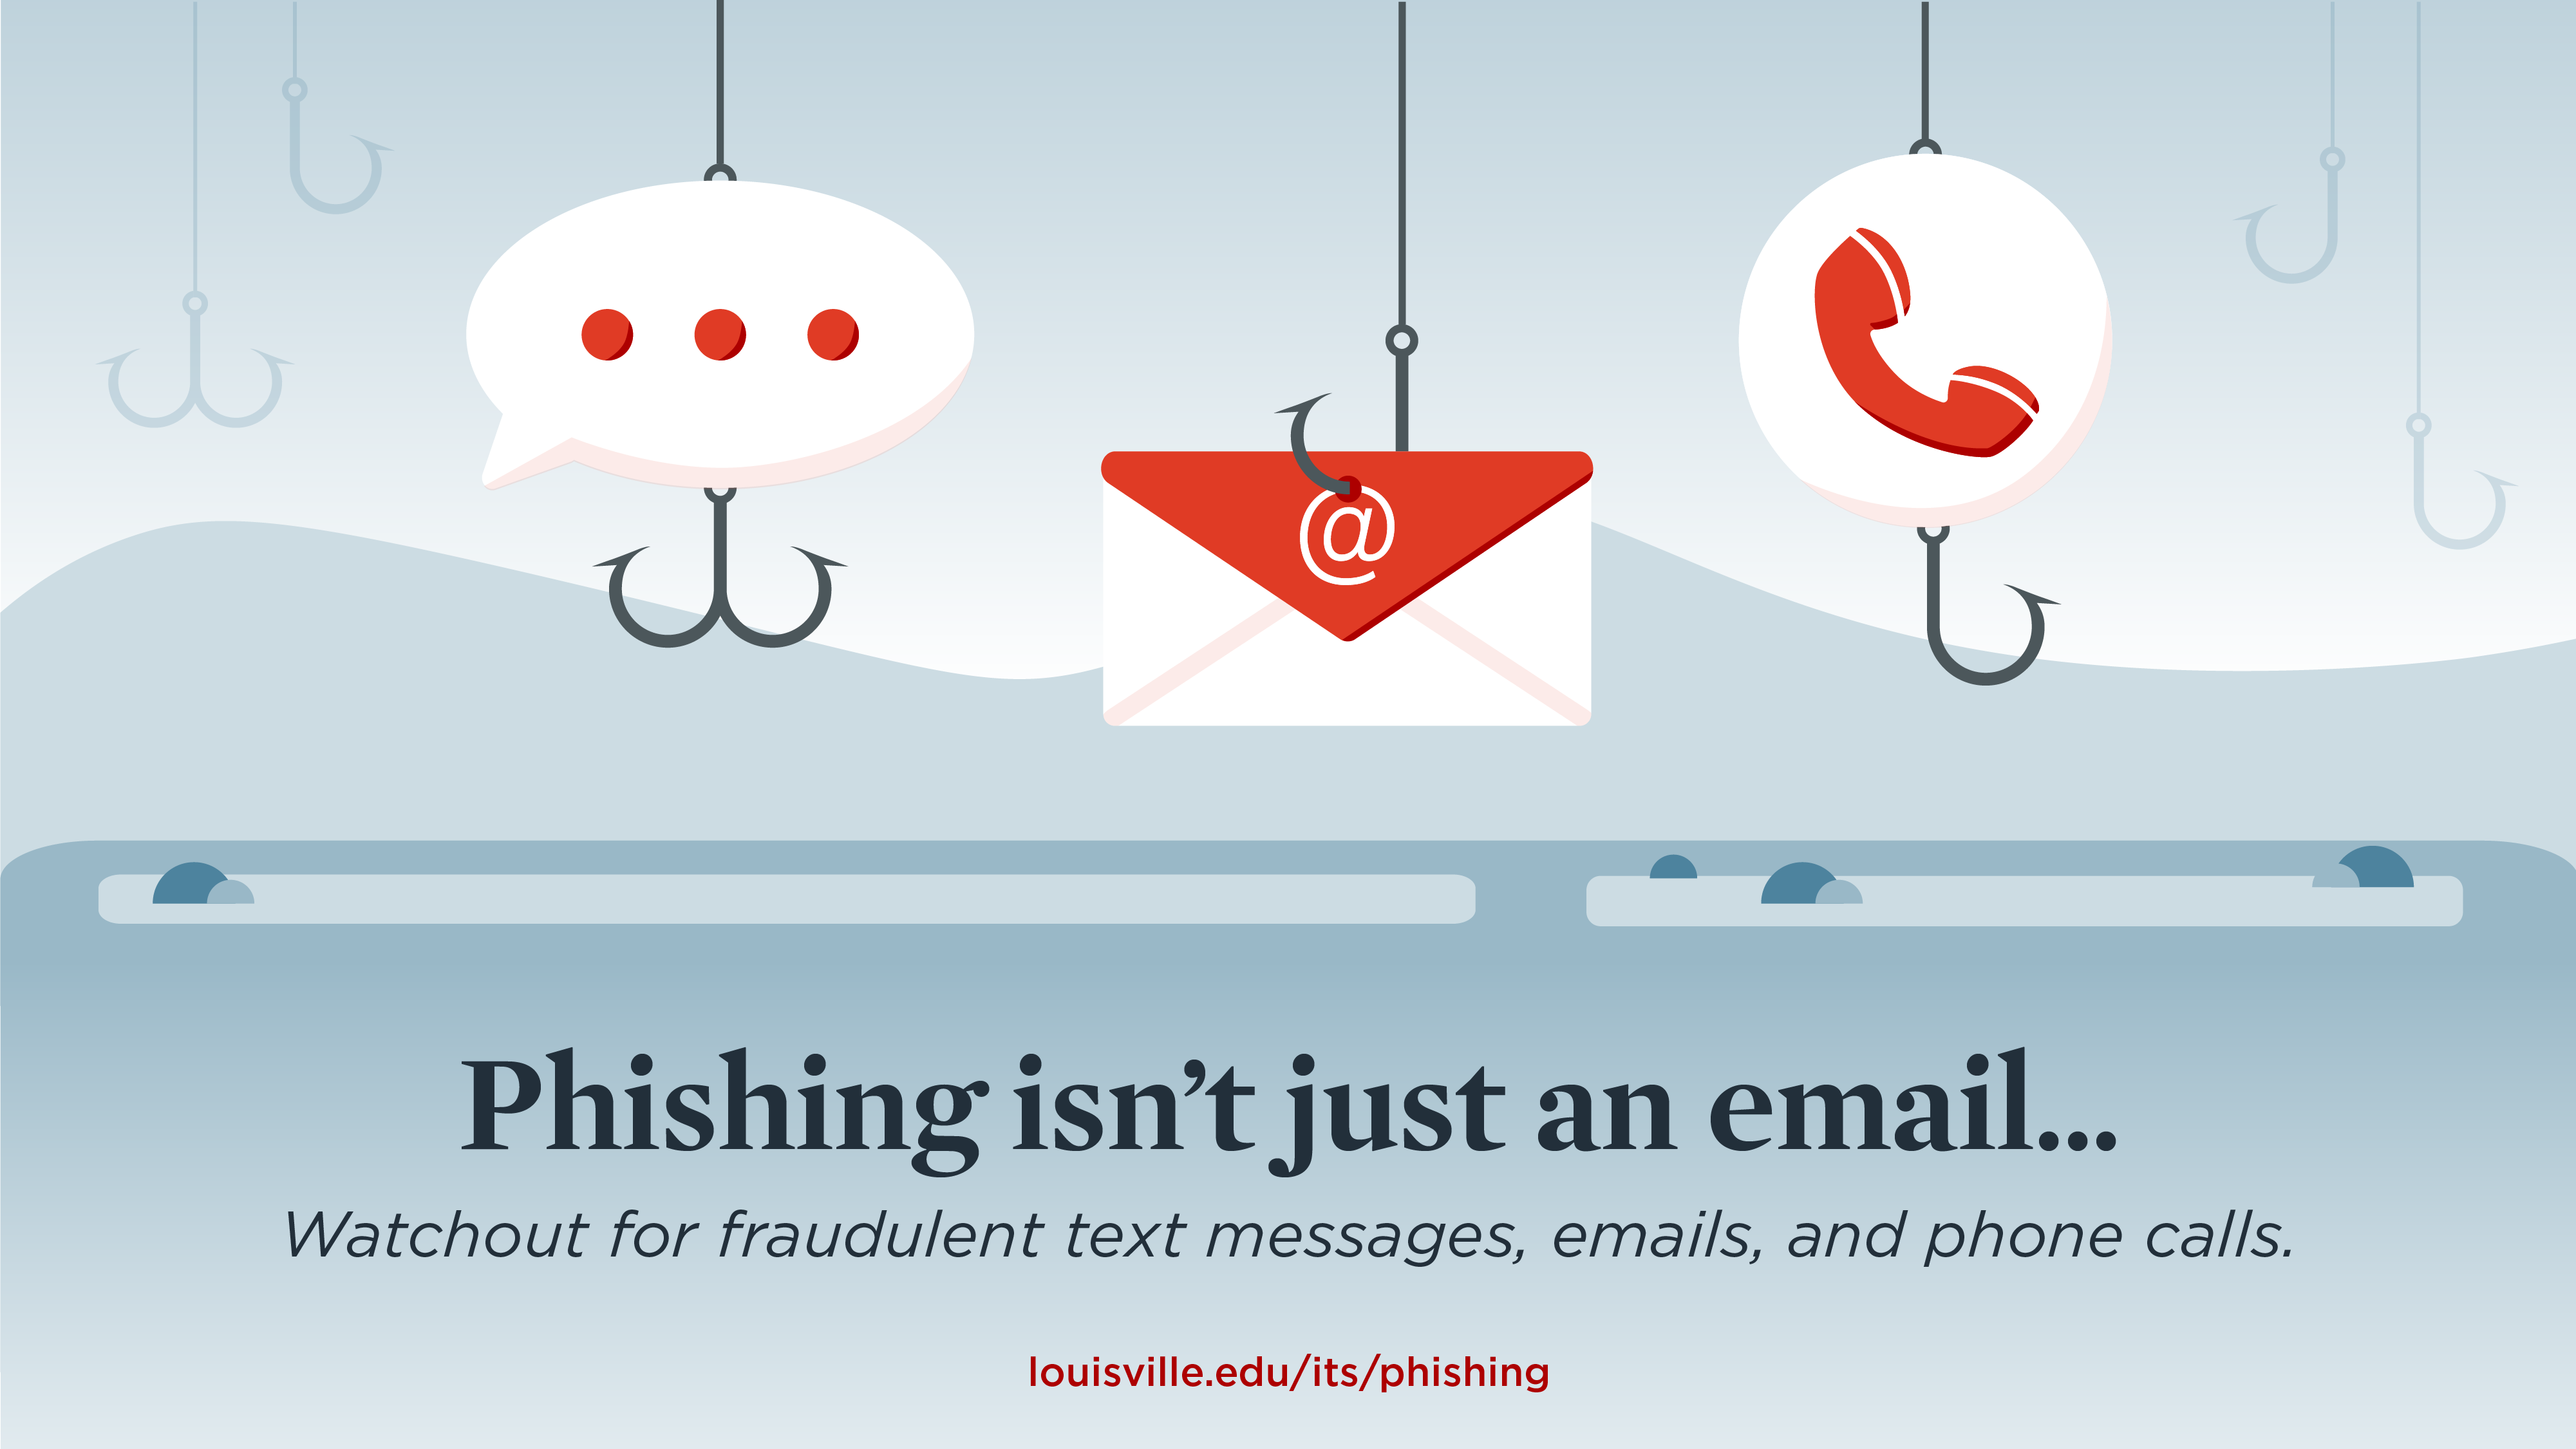 phishing isn't just an email, watch out for fraudulent text messages, emails, and phone calls